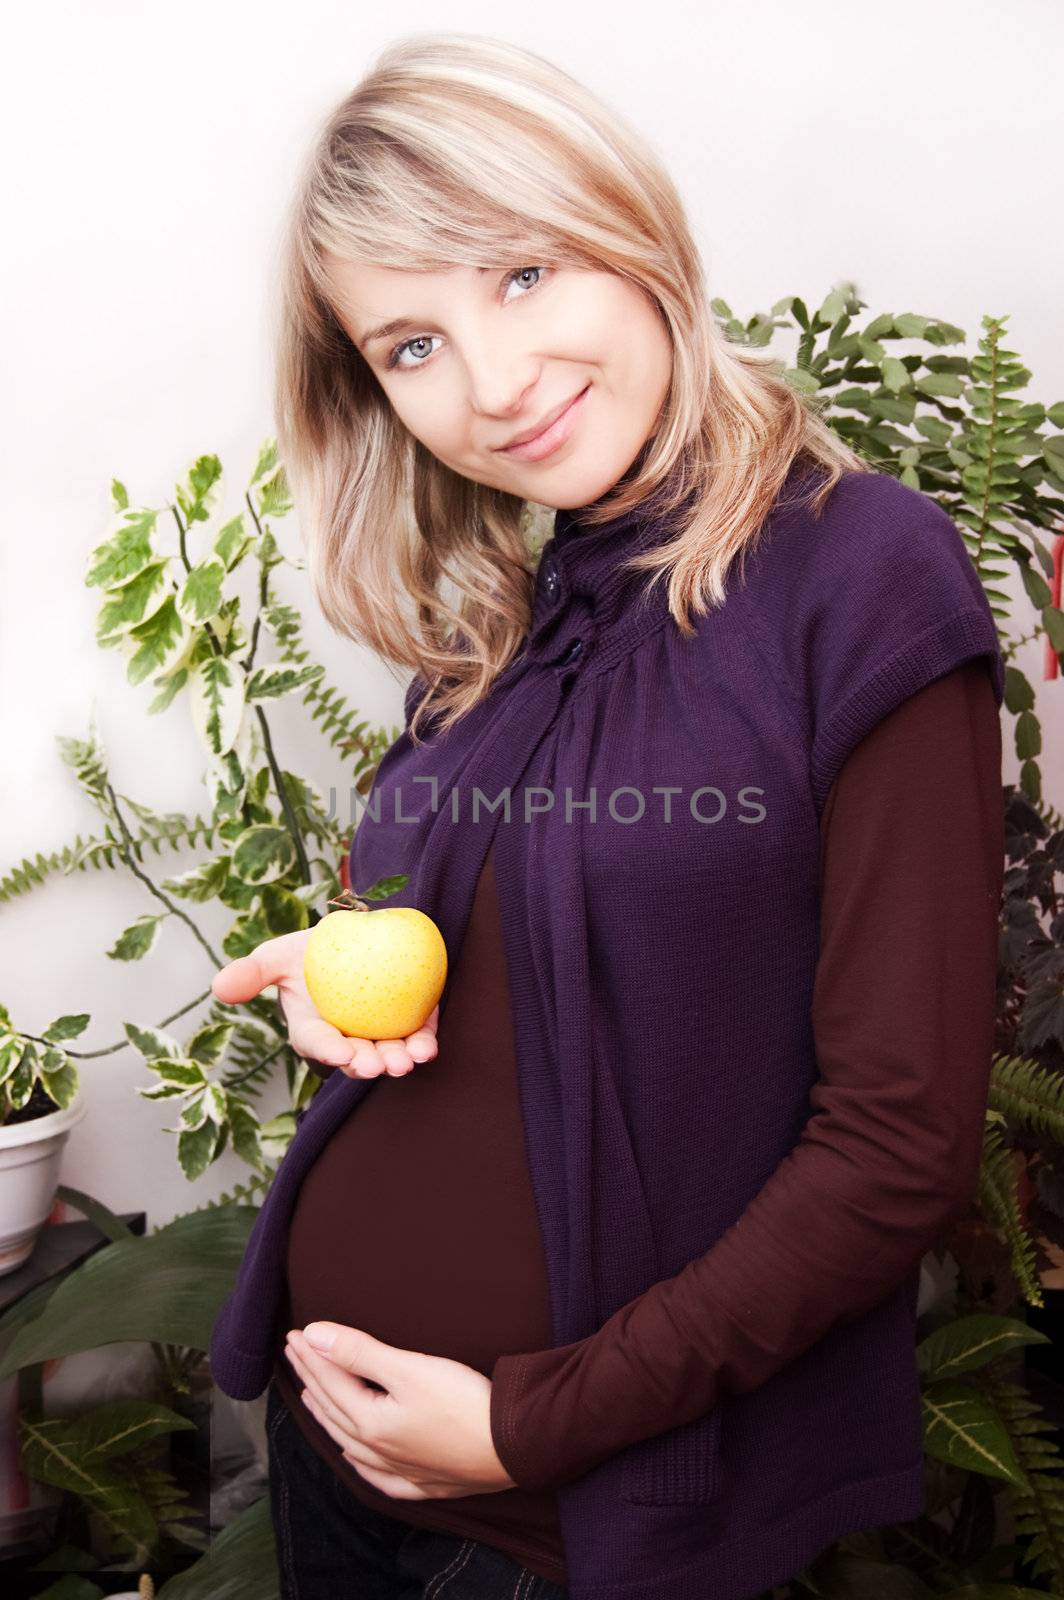 Smiling pregnant woman with yellow apple over home plants